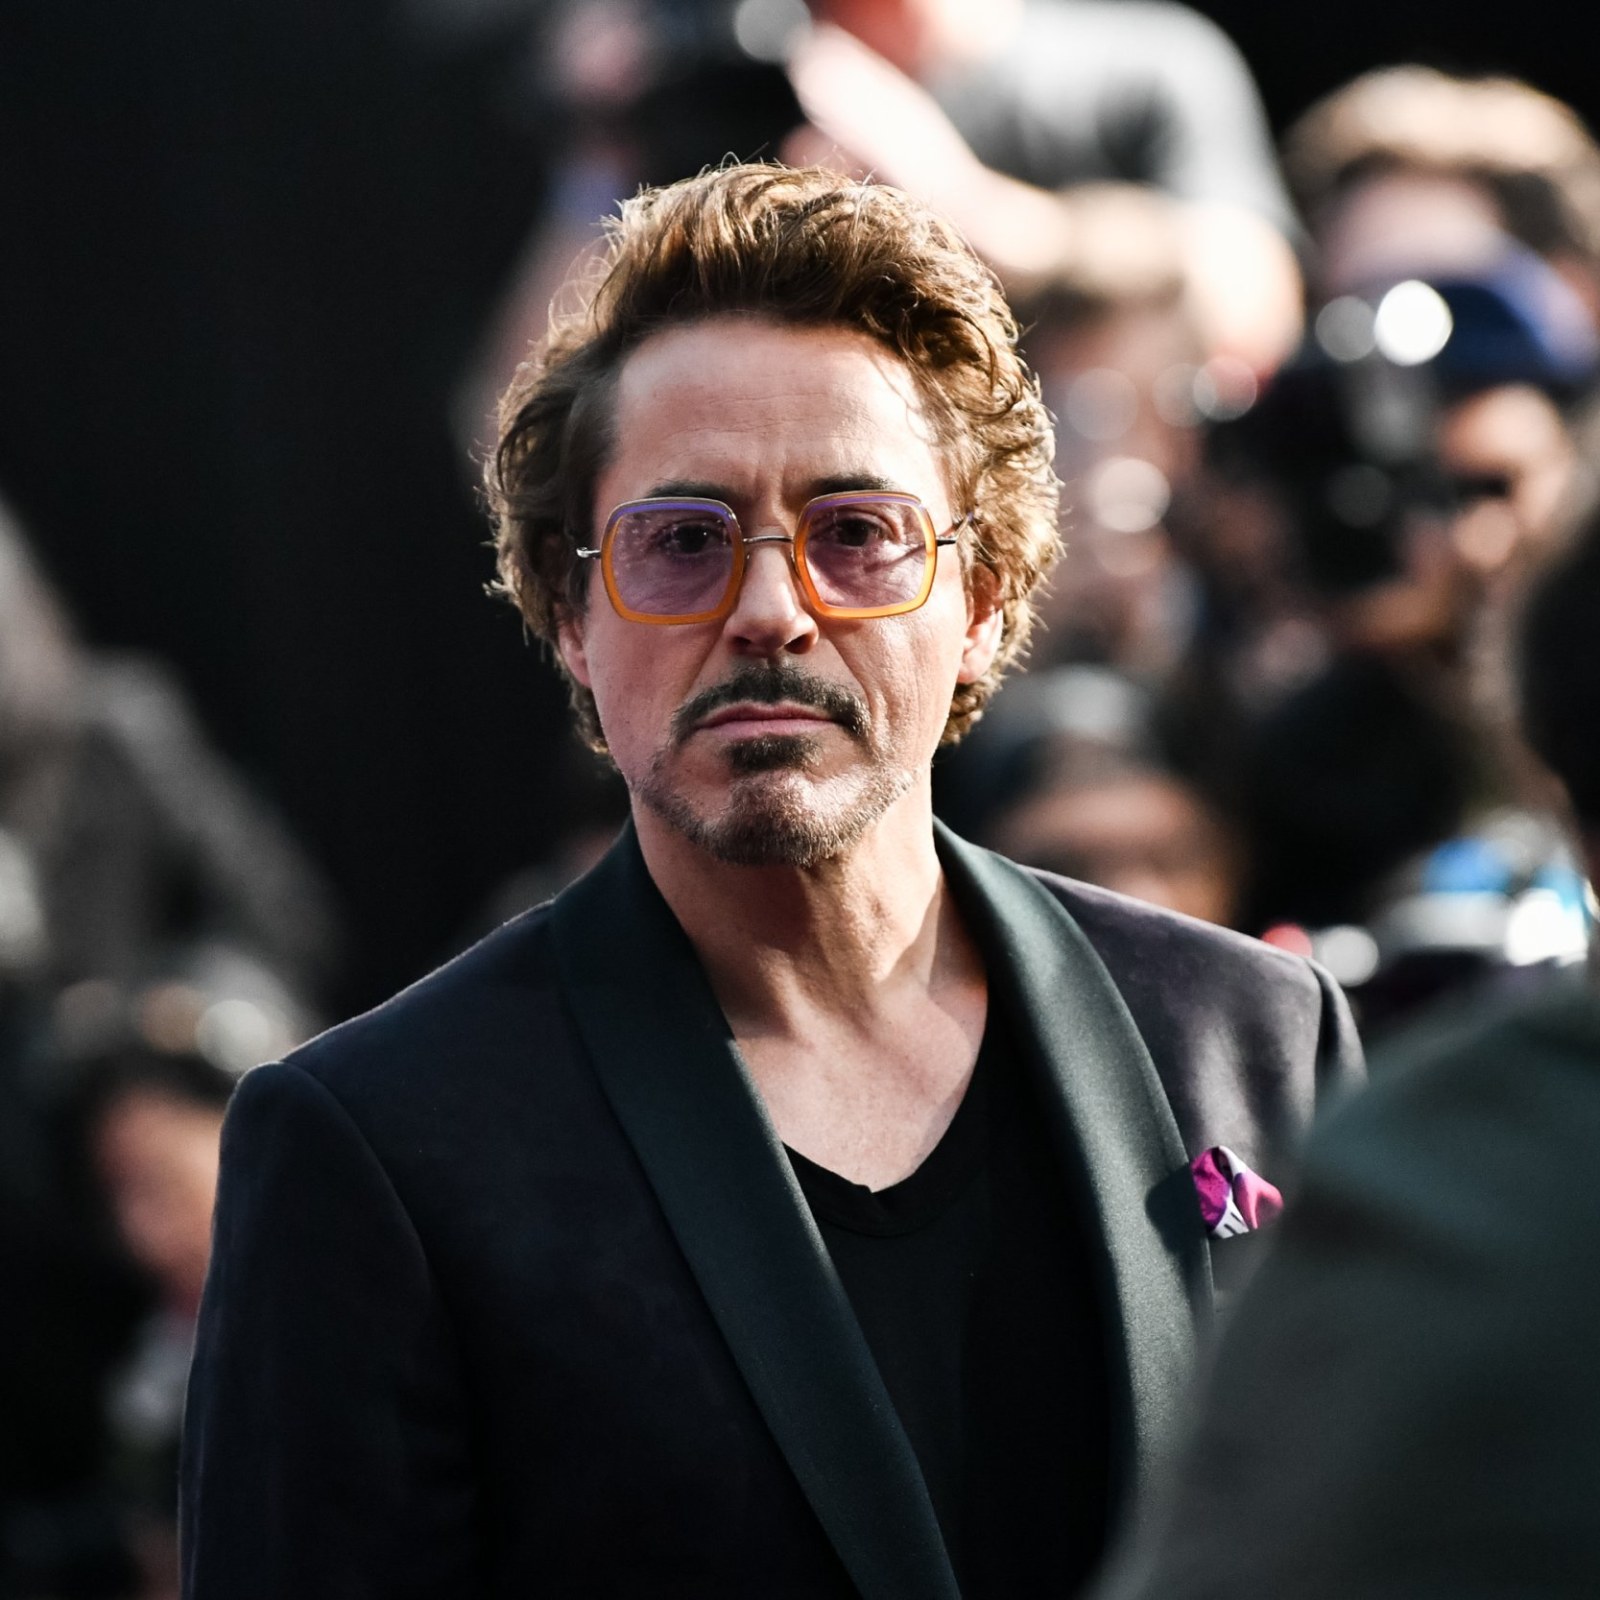 Robert Downey Jr. is totally unrecognizable with red hair and